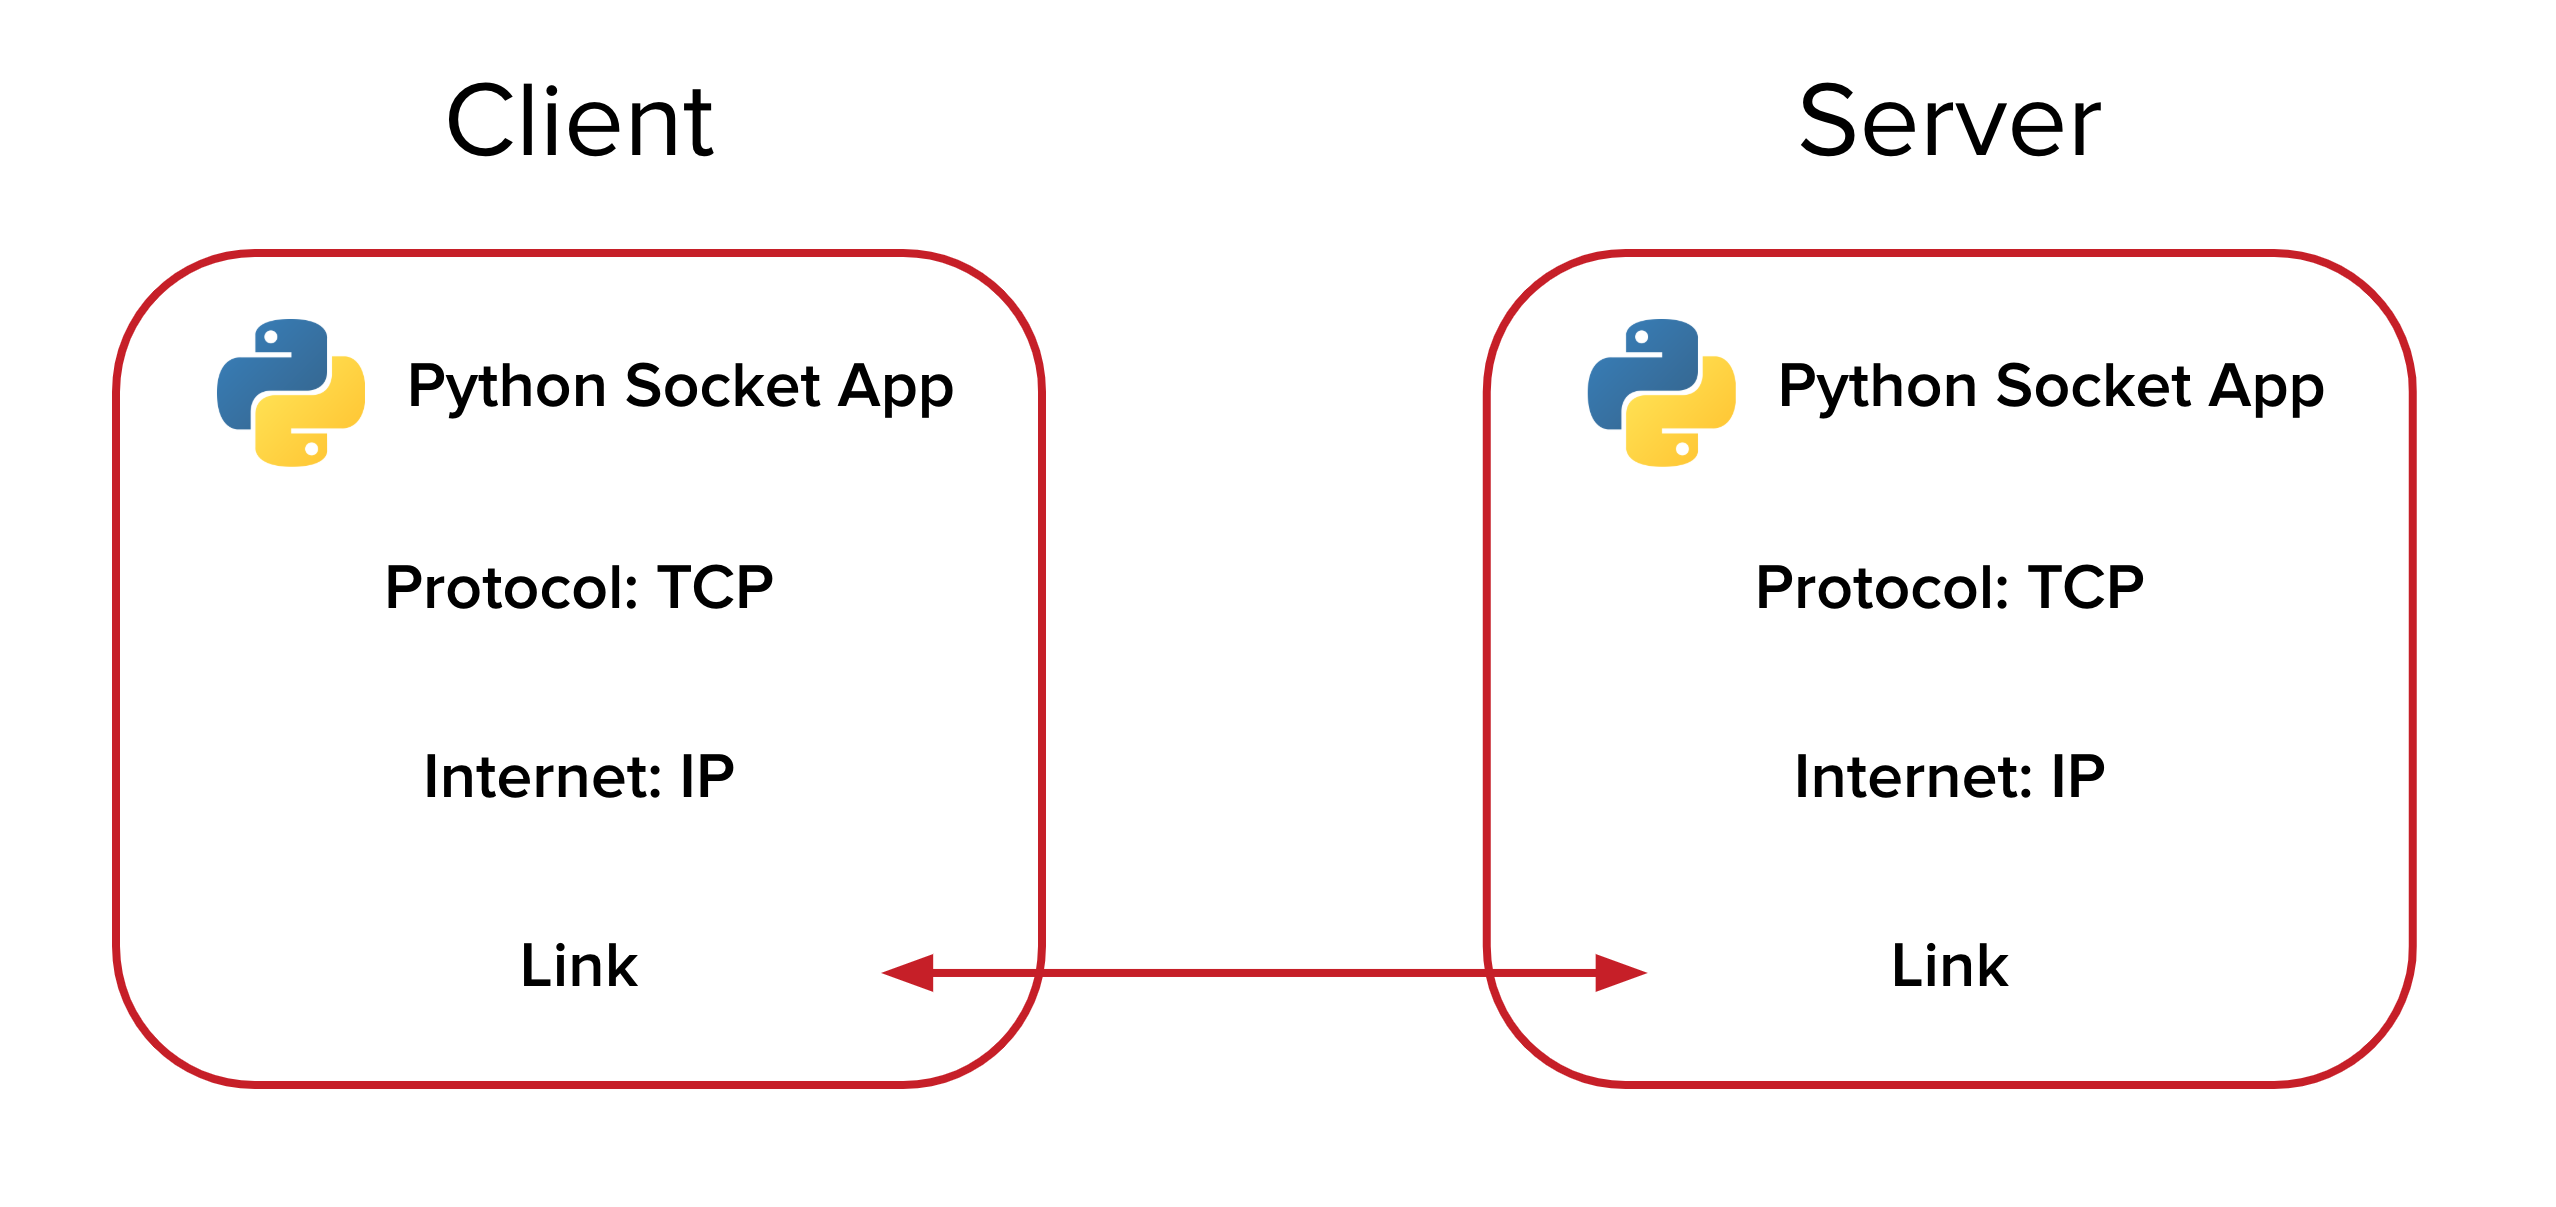 Begin by setting up the Python socket client and server